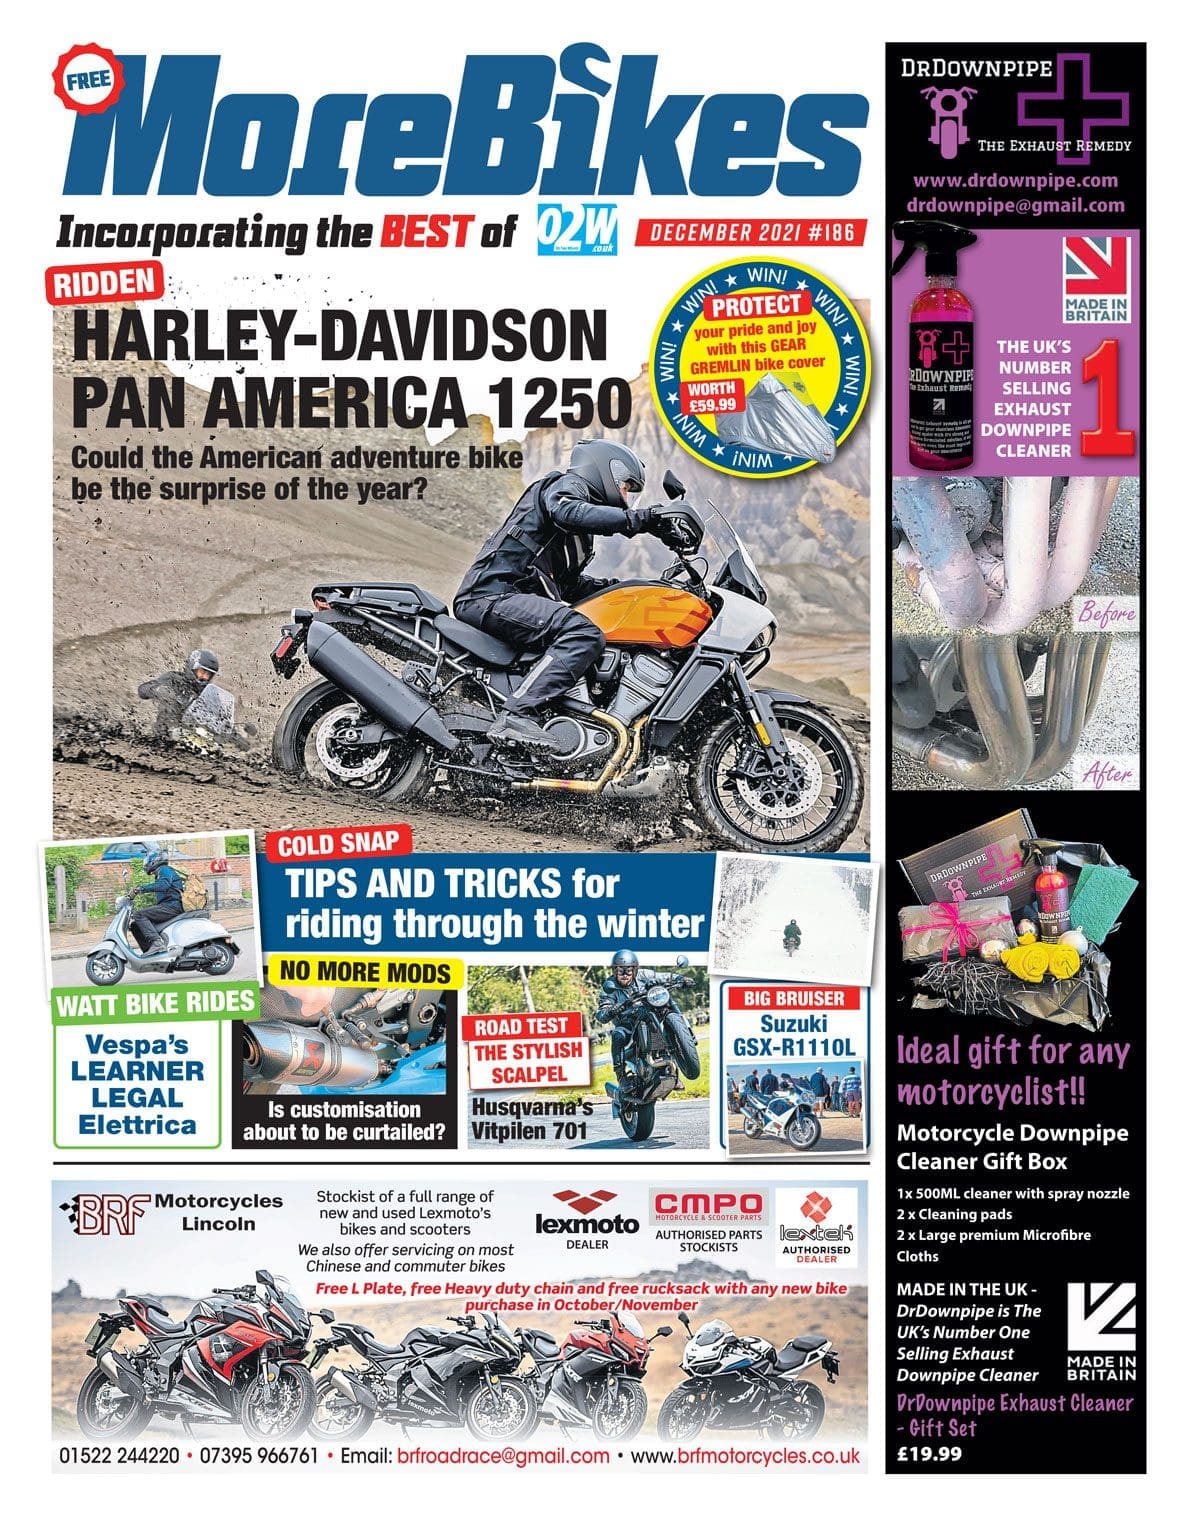 PREVIEW: December issue of MoreBikes newspaper